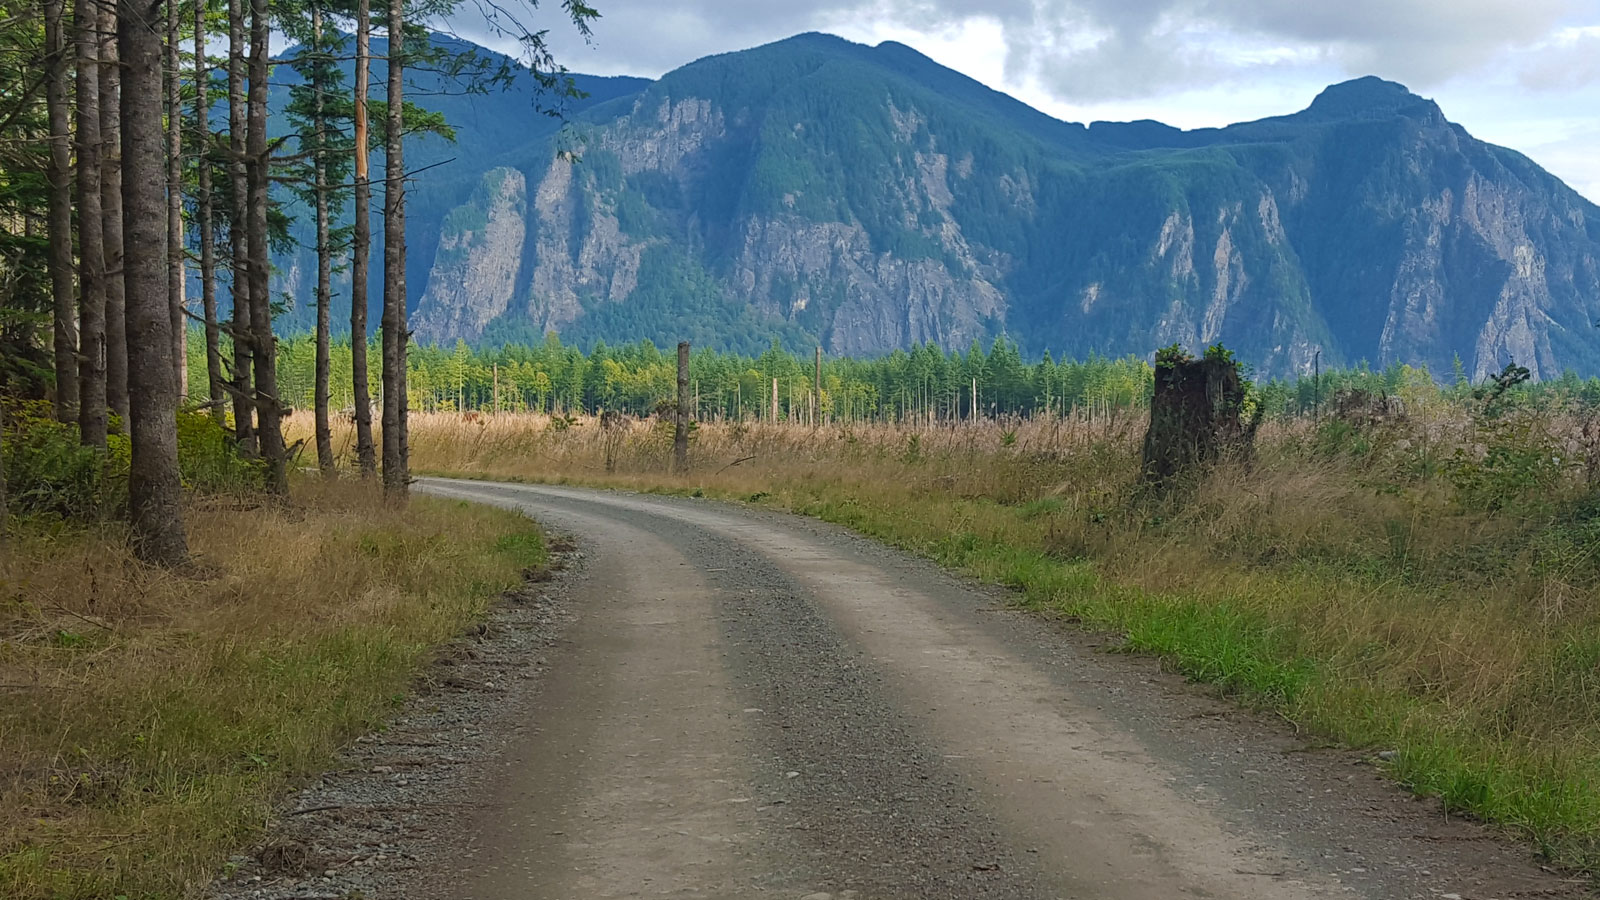 mt si in campbell global tree farm